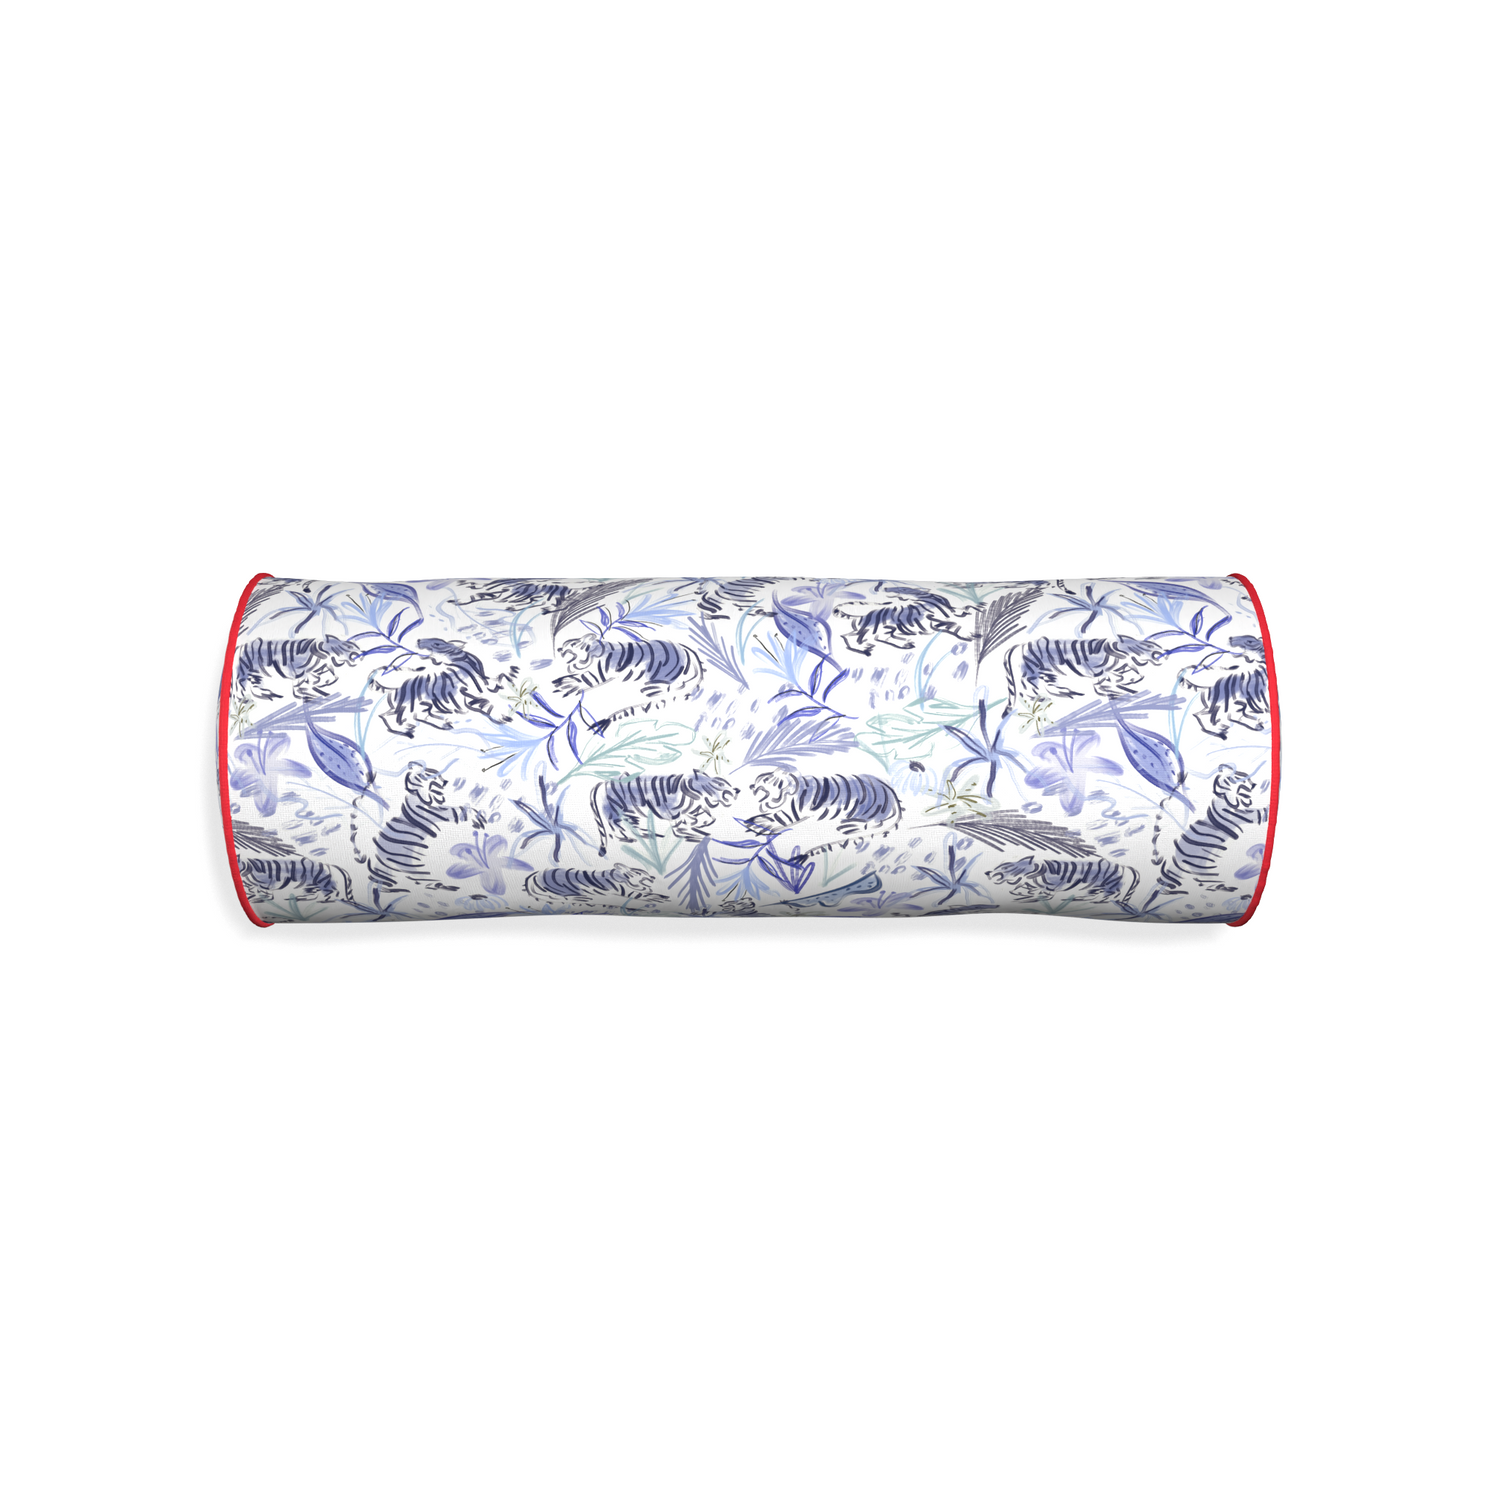 Bolster frida blue custom blue with intricate tiger designpillow with cherry piping on white background